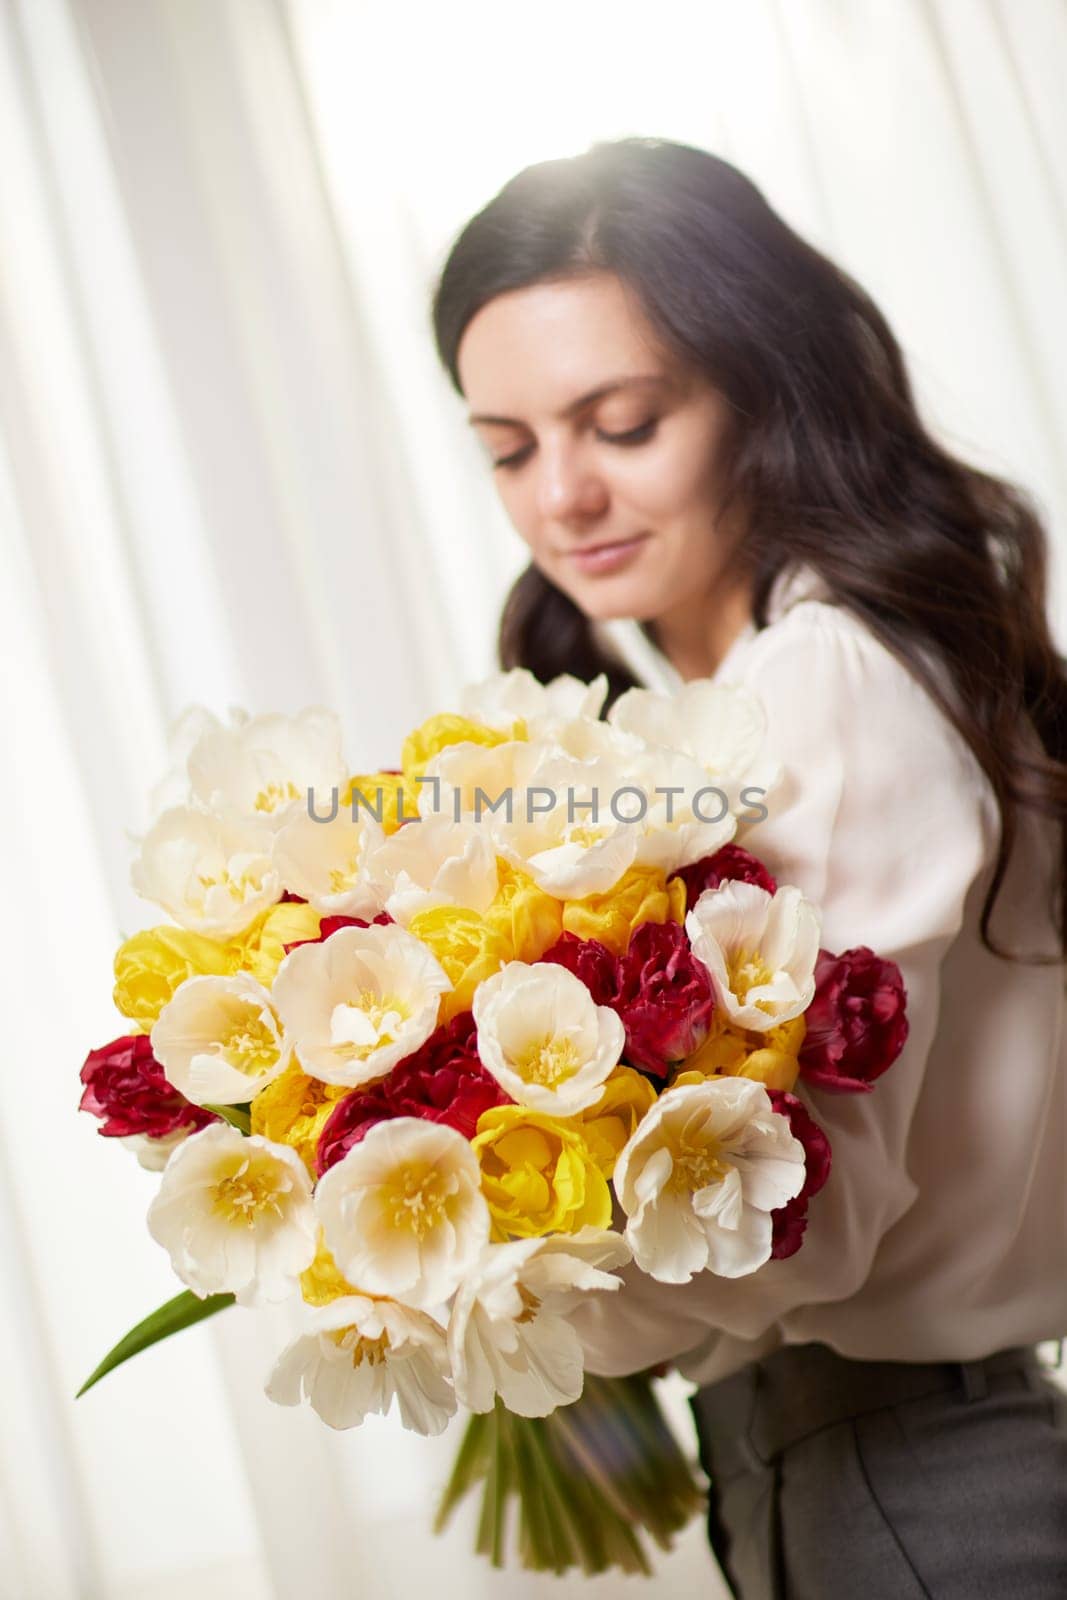 Beautiful woman in the white shirt with spring flowers tulips in hands. Women's Day. focus on flower